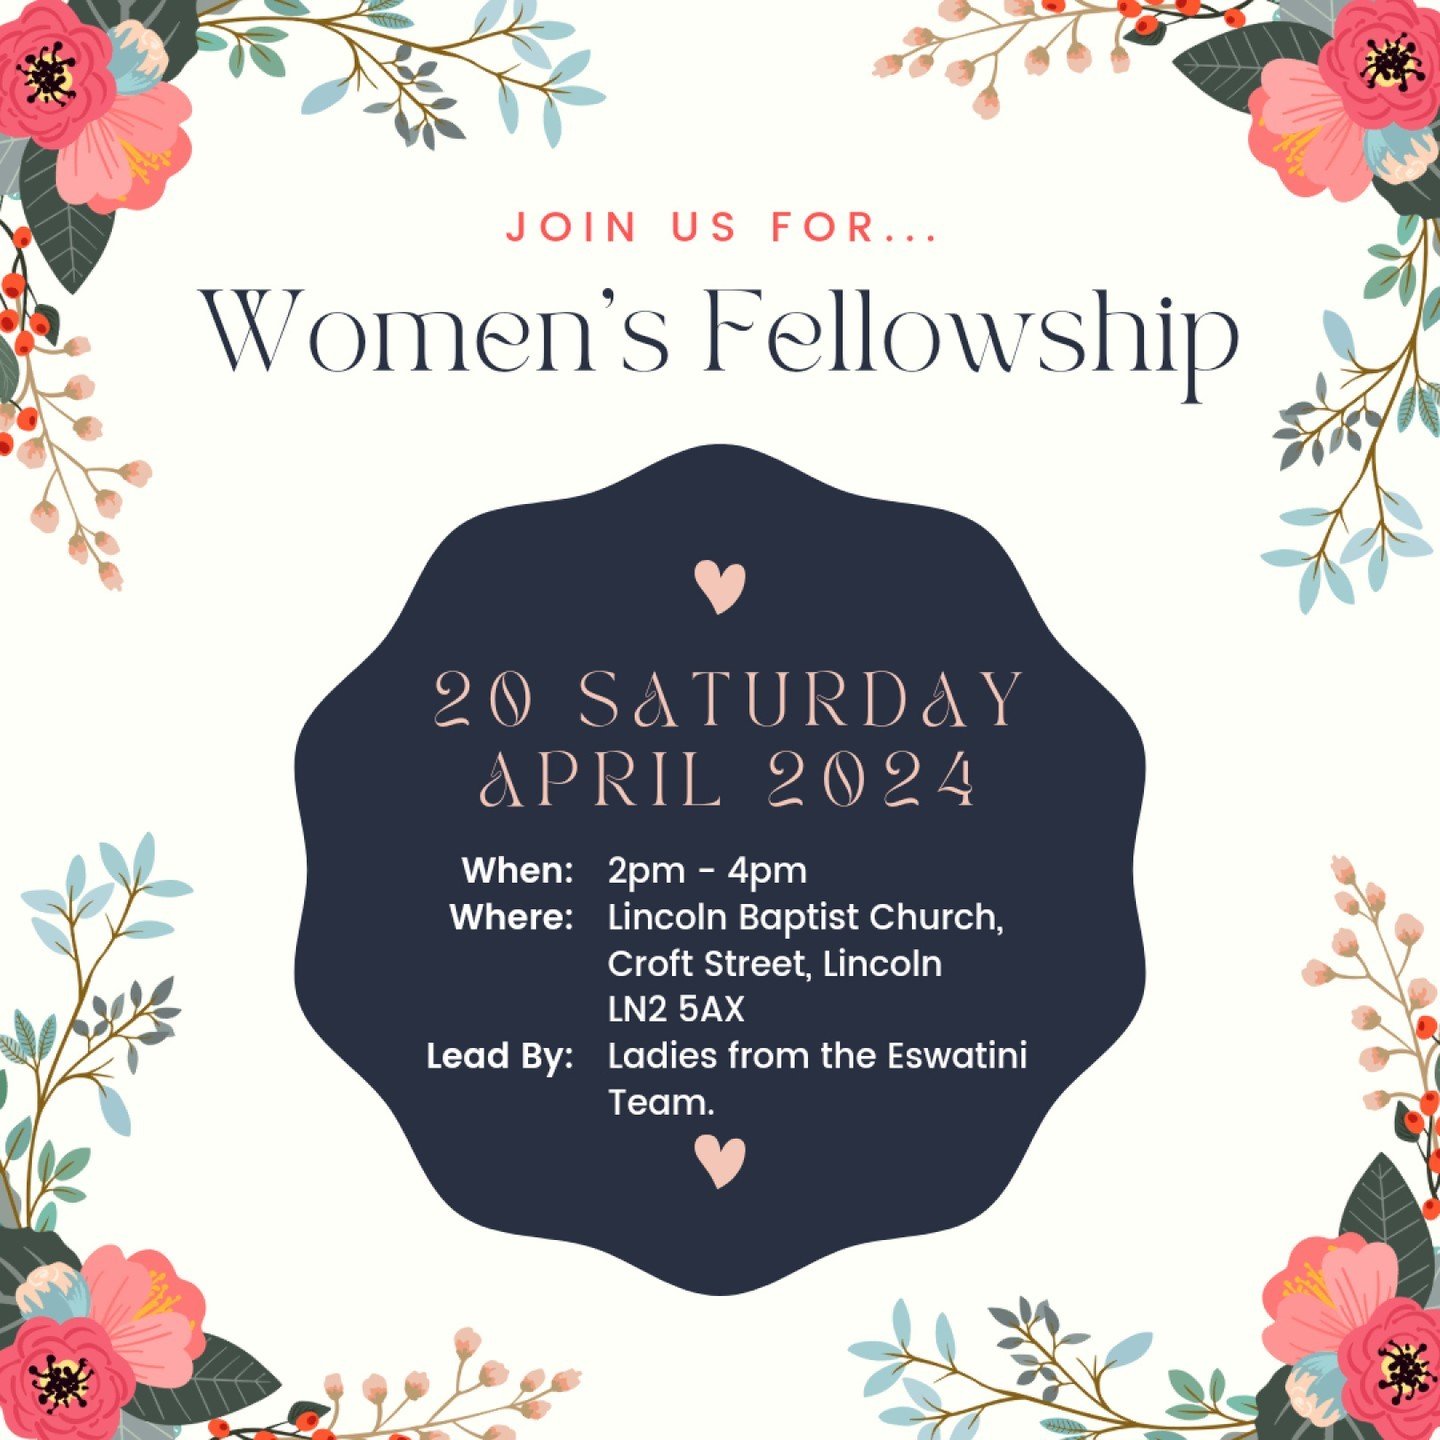 On Saturday 20th April we are hosting a time of Women's Fellowship which will be led by the ladies from the Eswatini Team.

Please join us from 2pm to 4pm to enjoy a time of fellowship together at Lincoln Baptist Church.

This is a free event for all